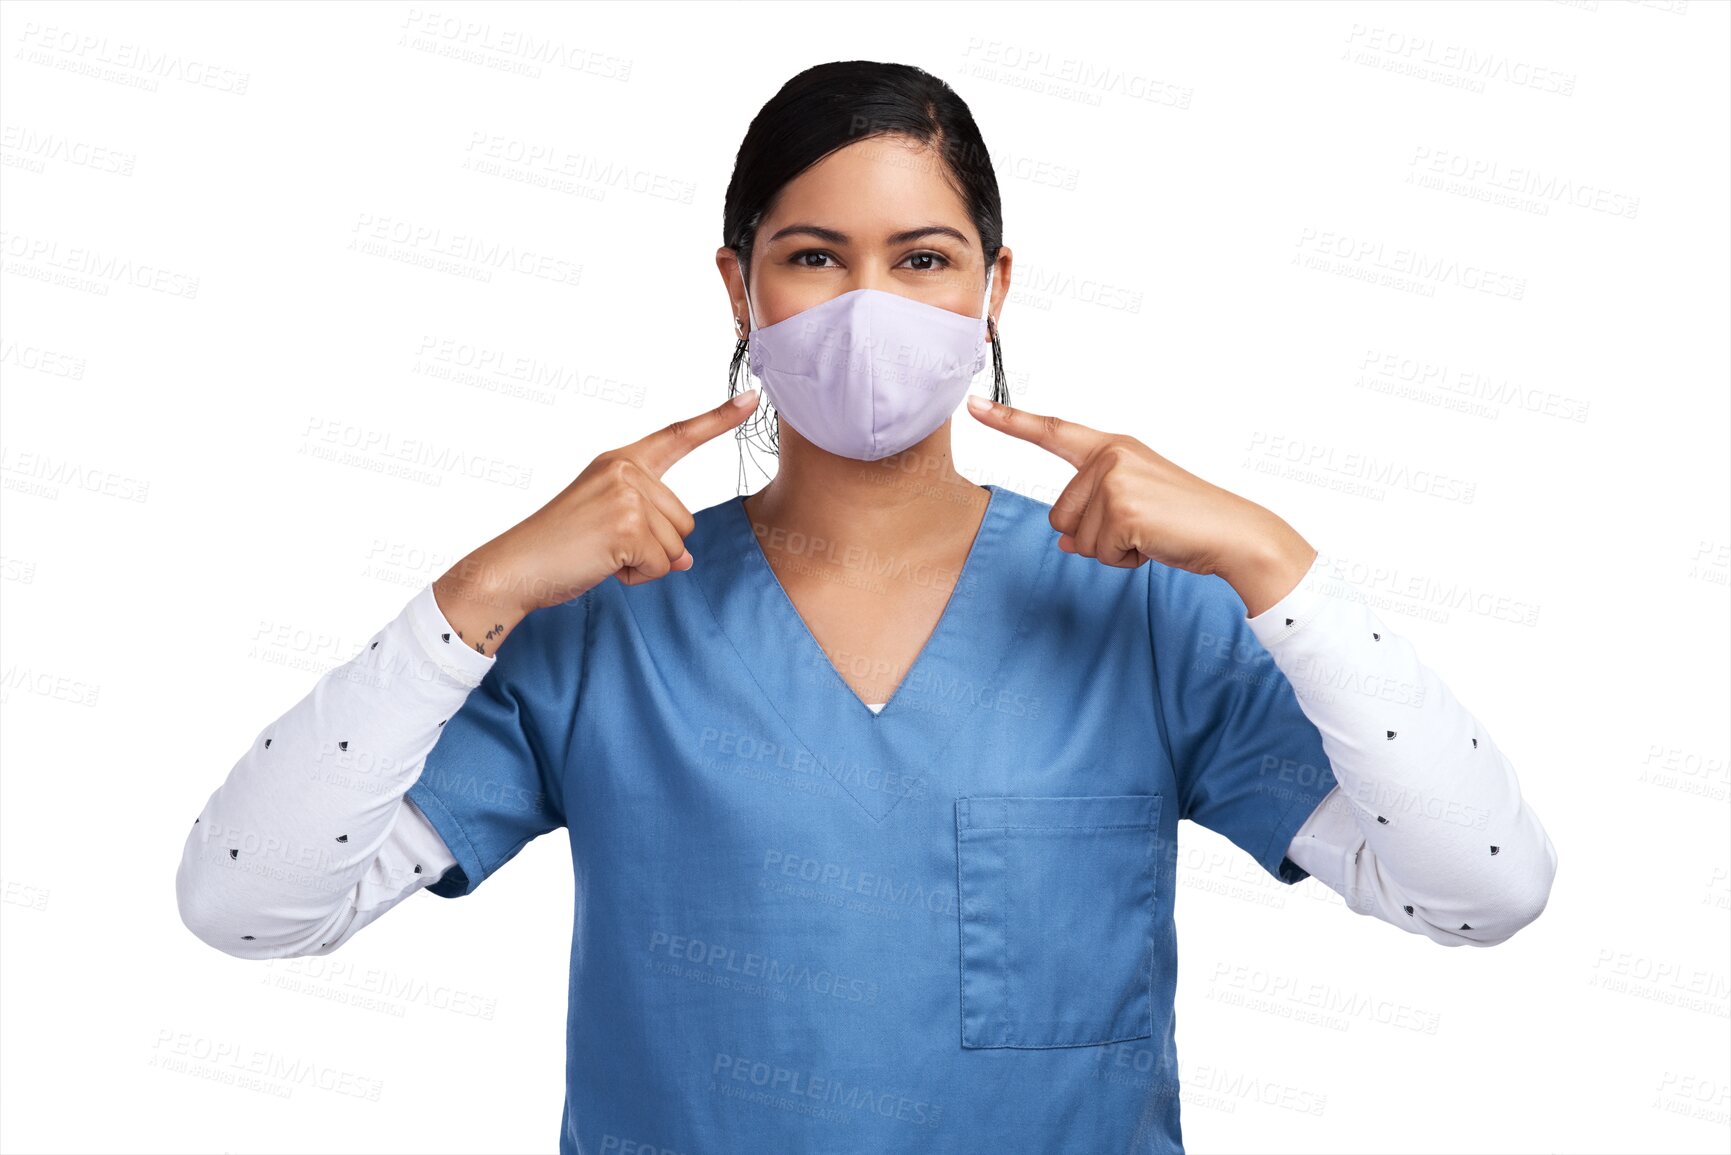 Buy stock photo Healthcare, medical face mask and a woman nurse isolated on a transparent, png background. Professional female person, surgeon or doctor pointing finger at ppe safety for virus, covid or surgery